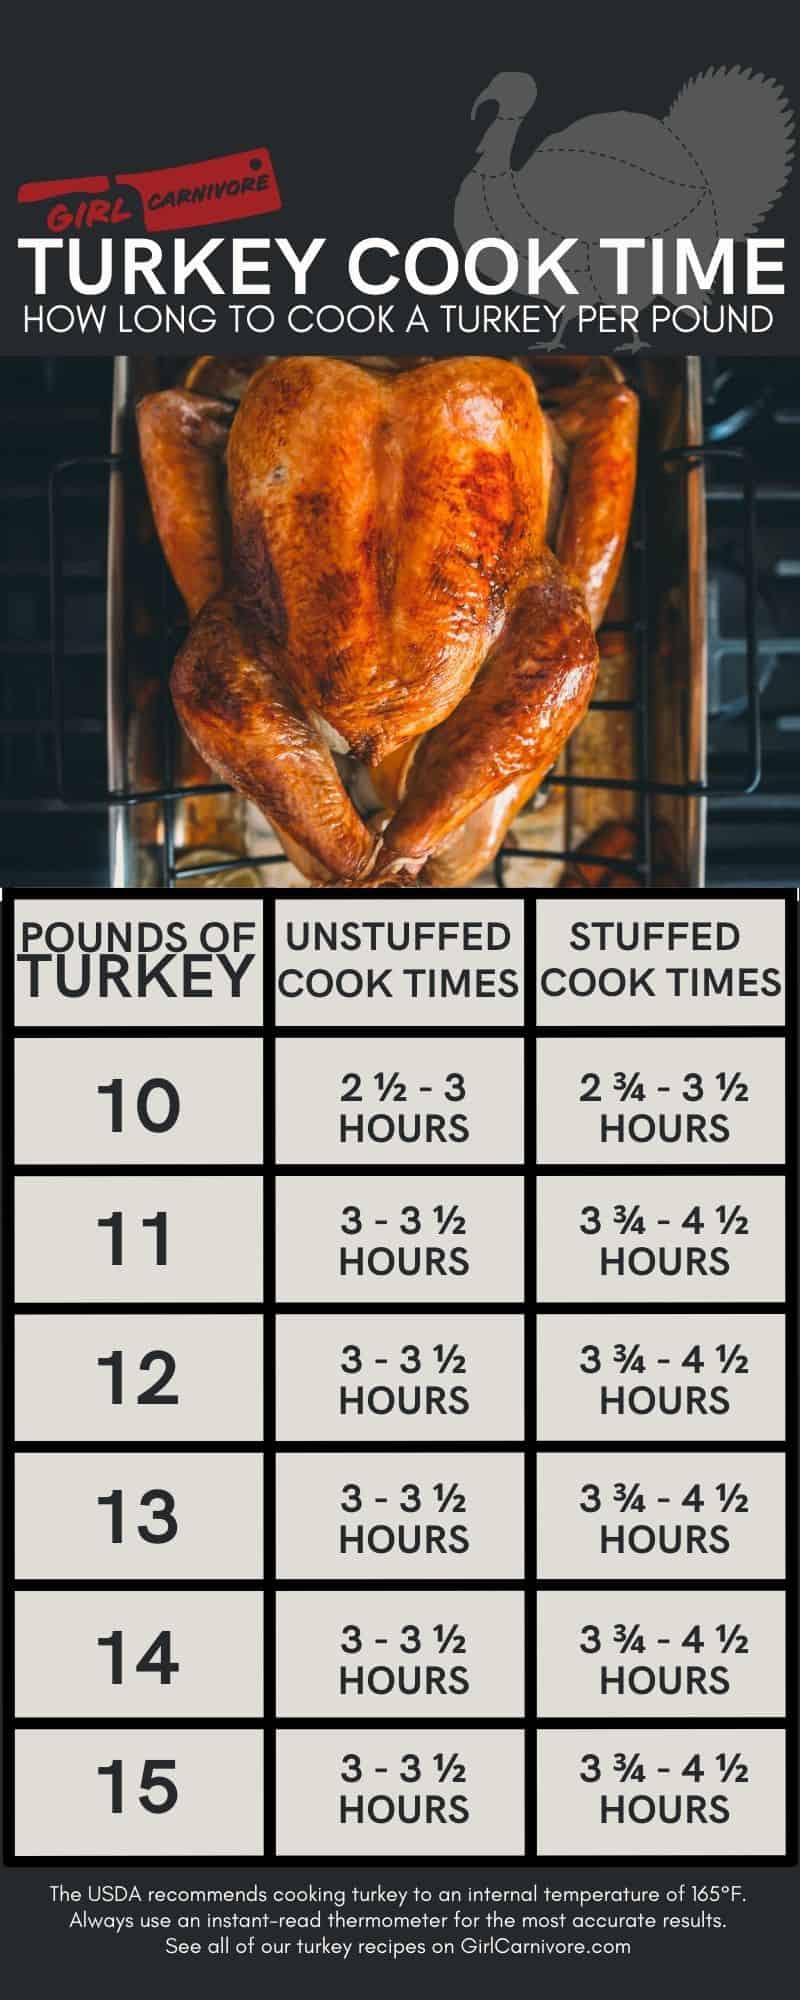 Infographic for turkey cooking times showing how long to cook a turkey per pound.